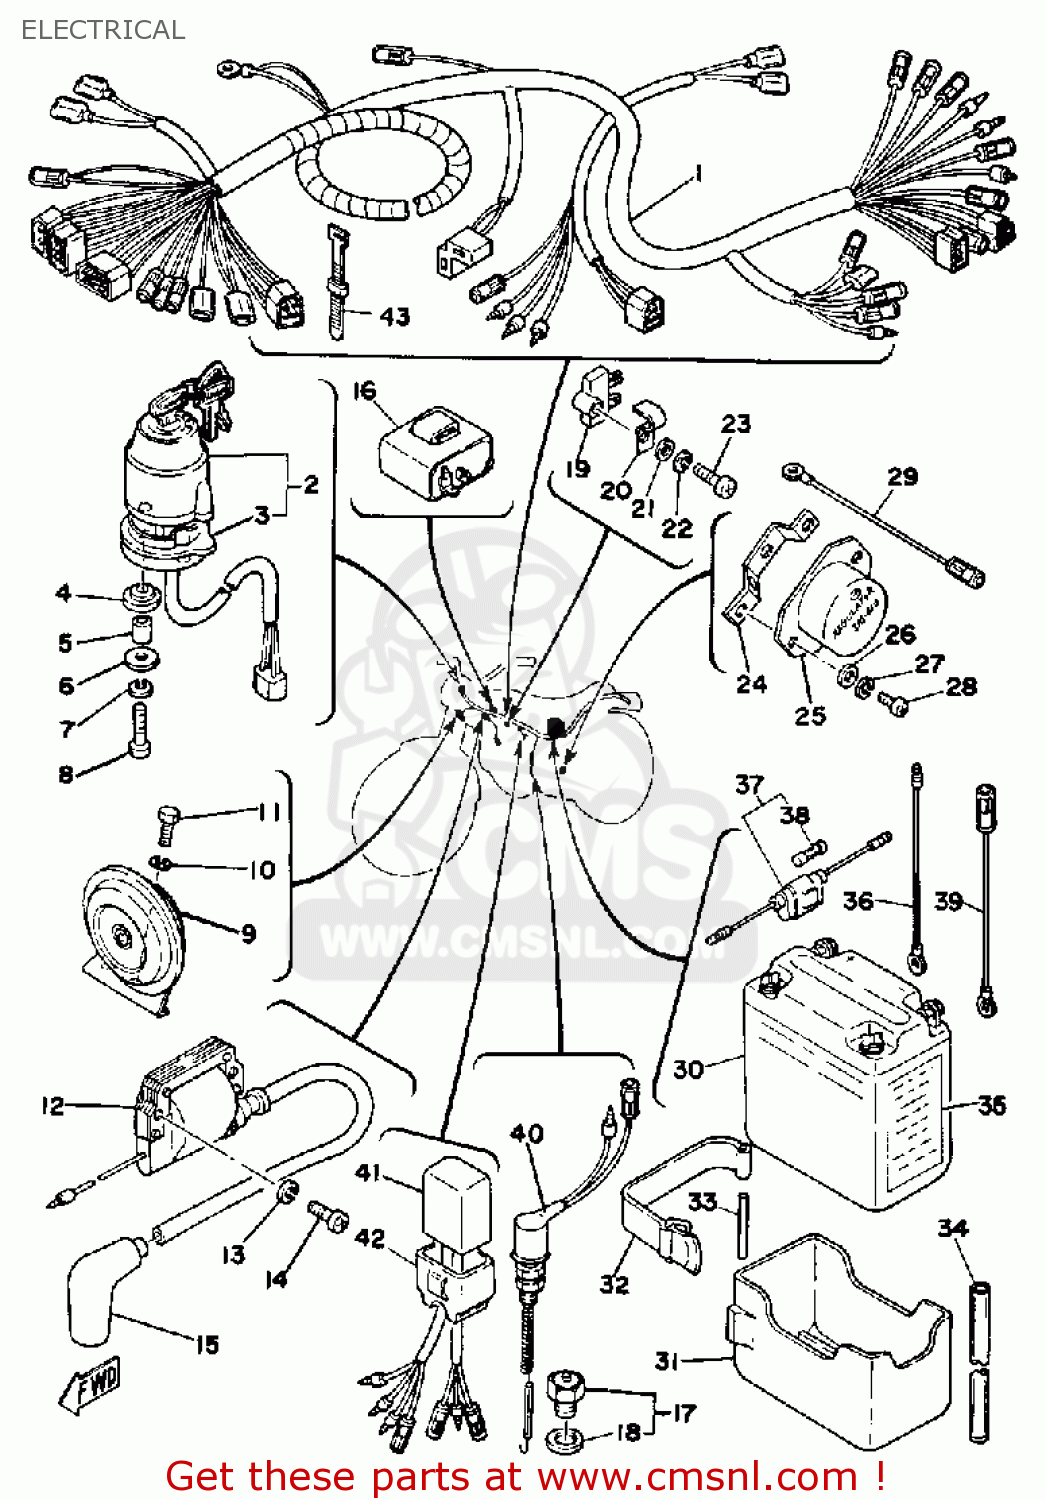 Yamaha DT175 1979 USA ELECTRICAL - buy original ELECTRICAL ... cat 5 wire schematic 